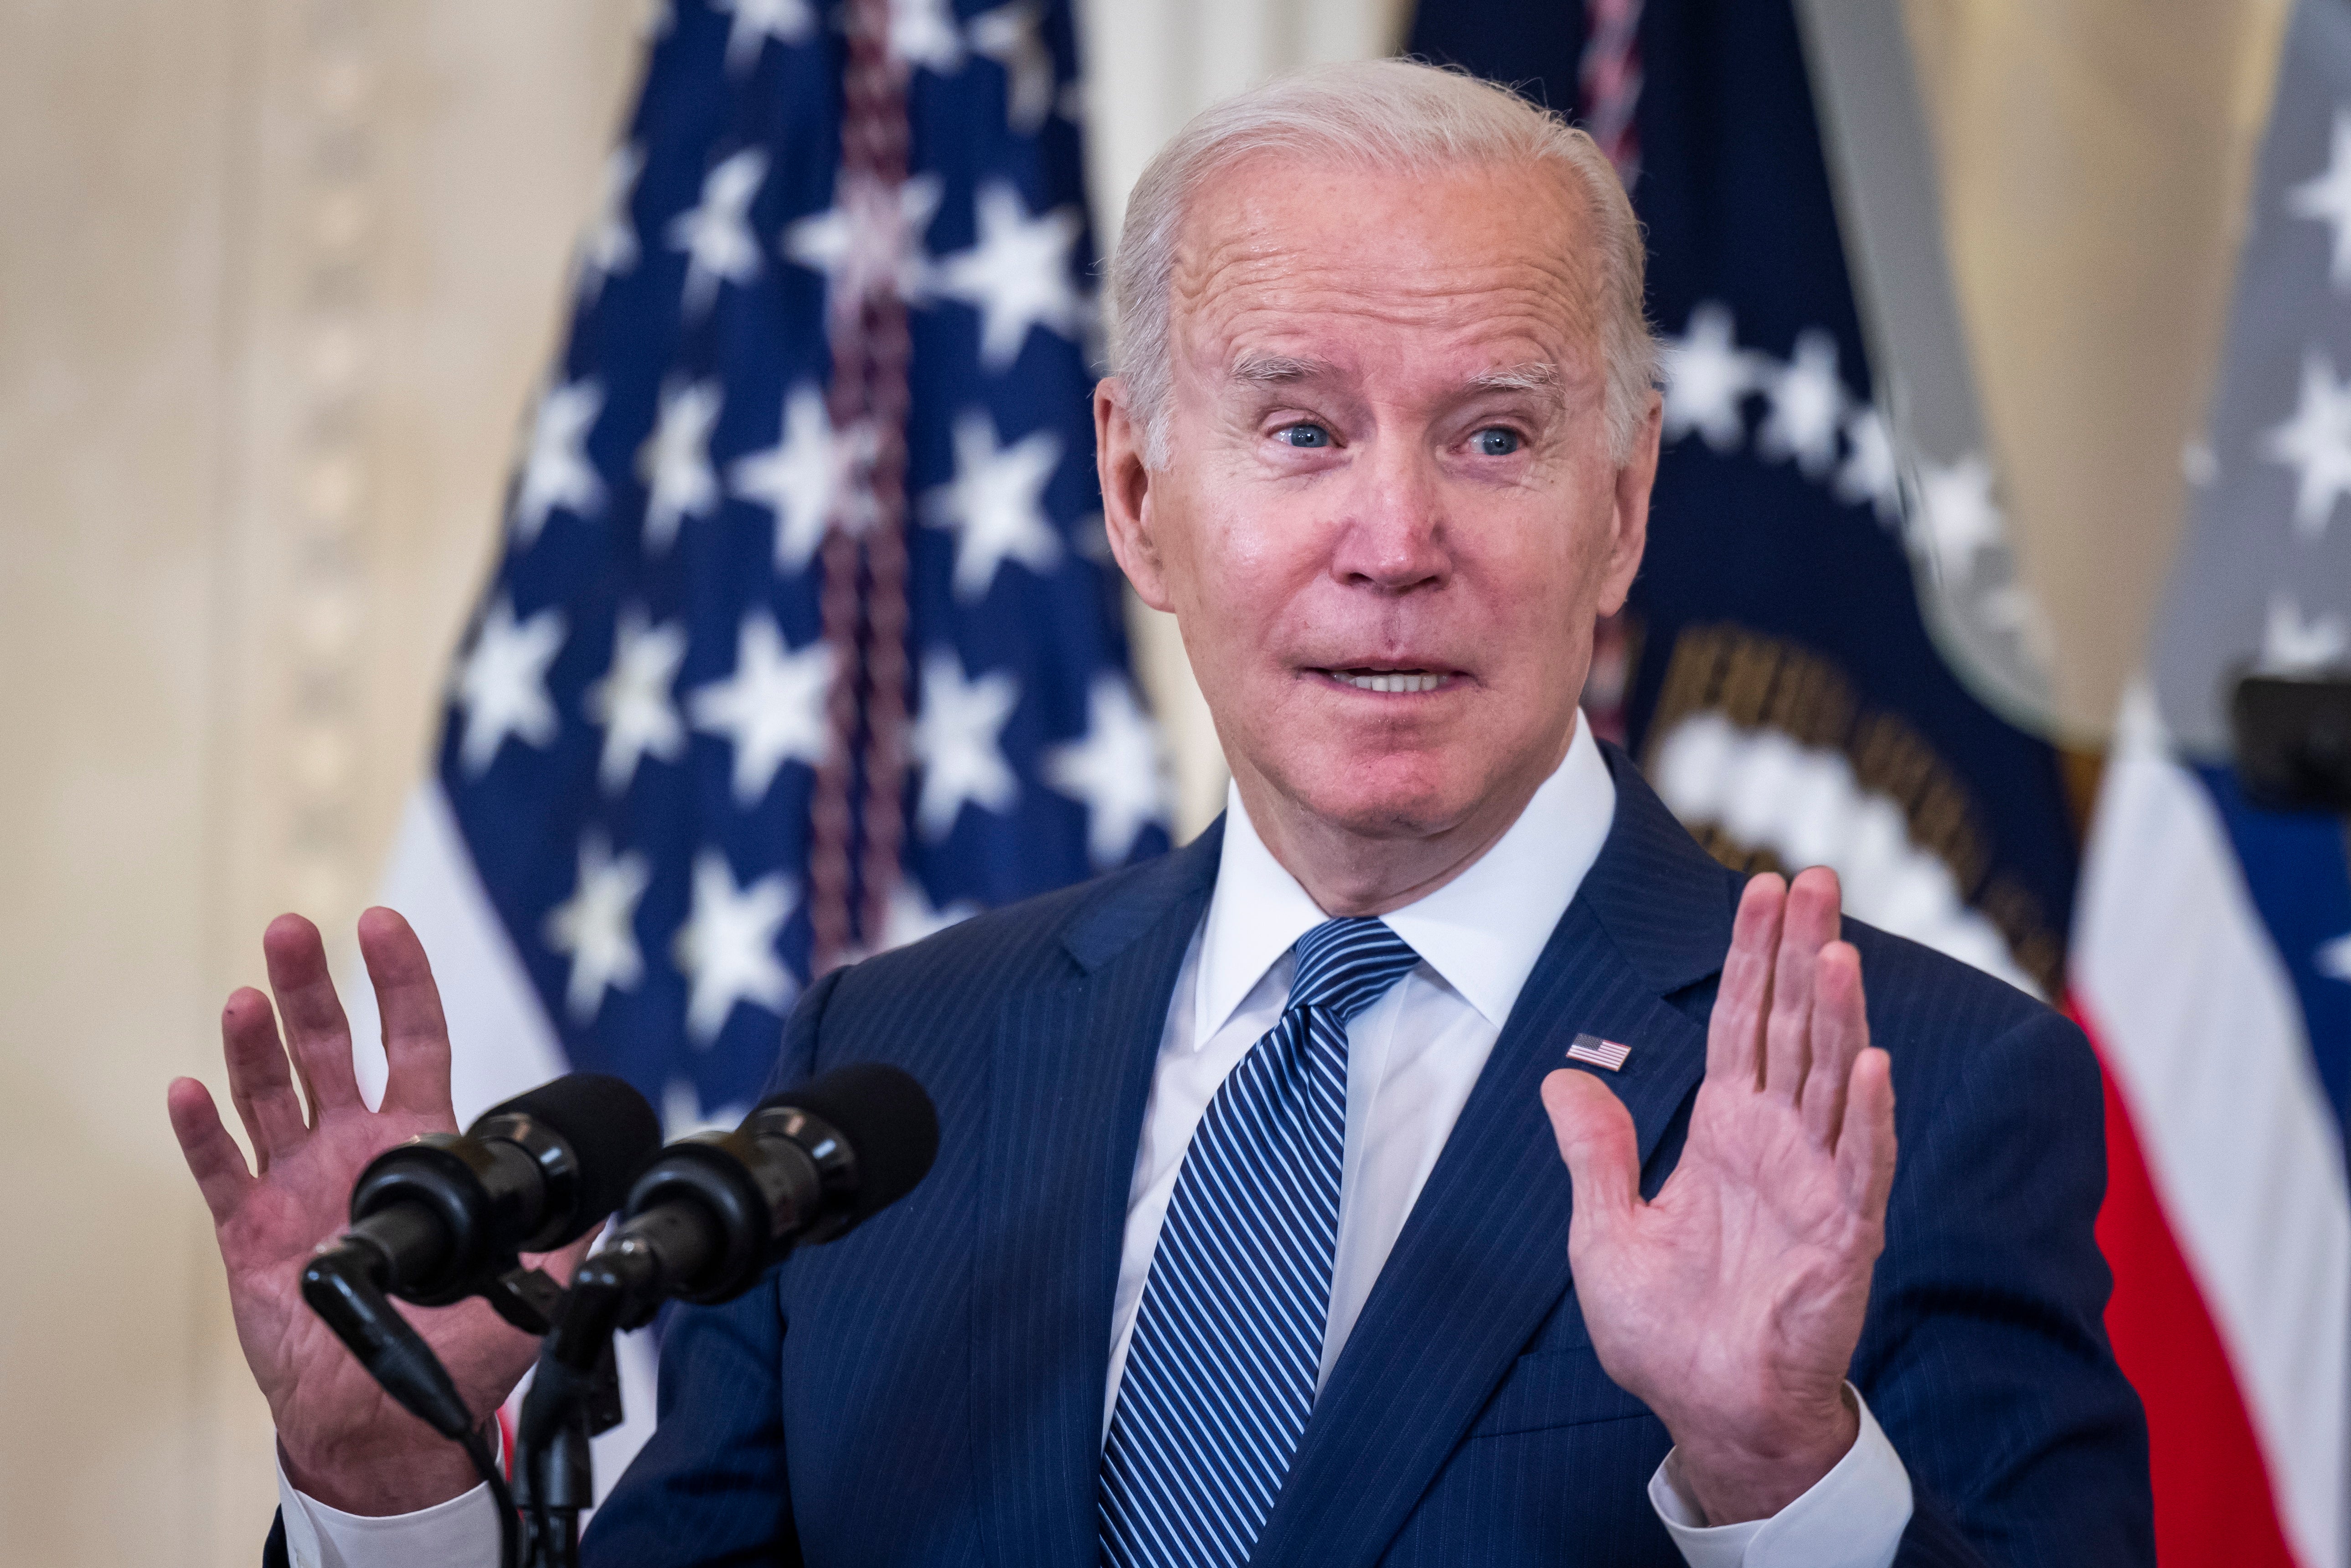 President Joe Biden has made clear his determination to protect the Good Friday Agreement